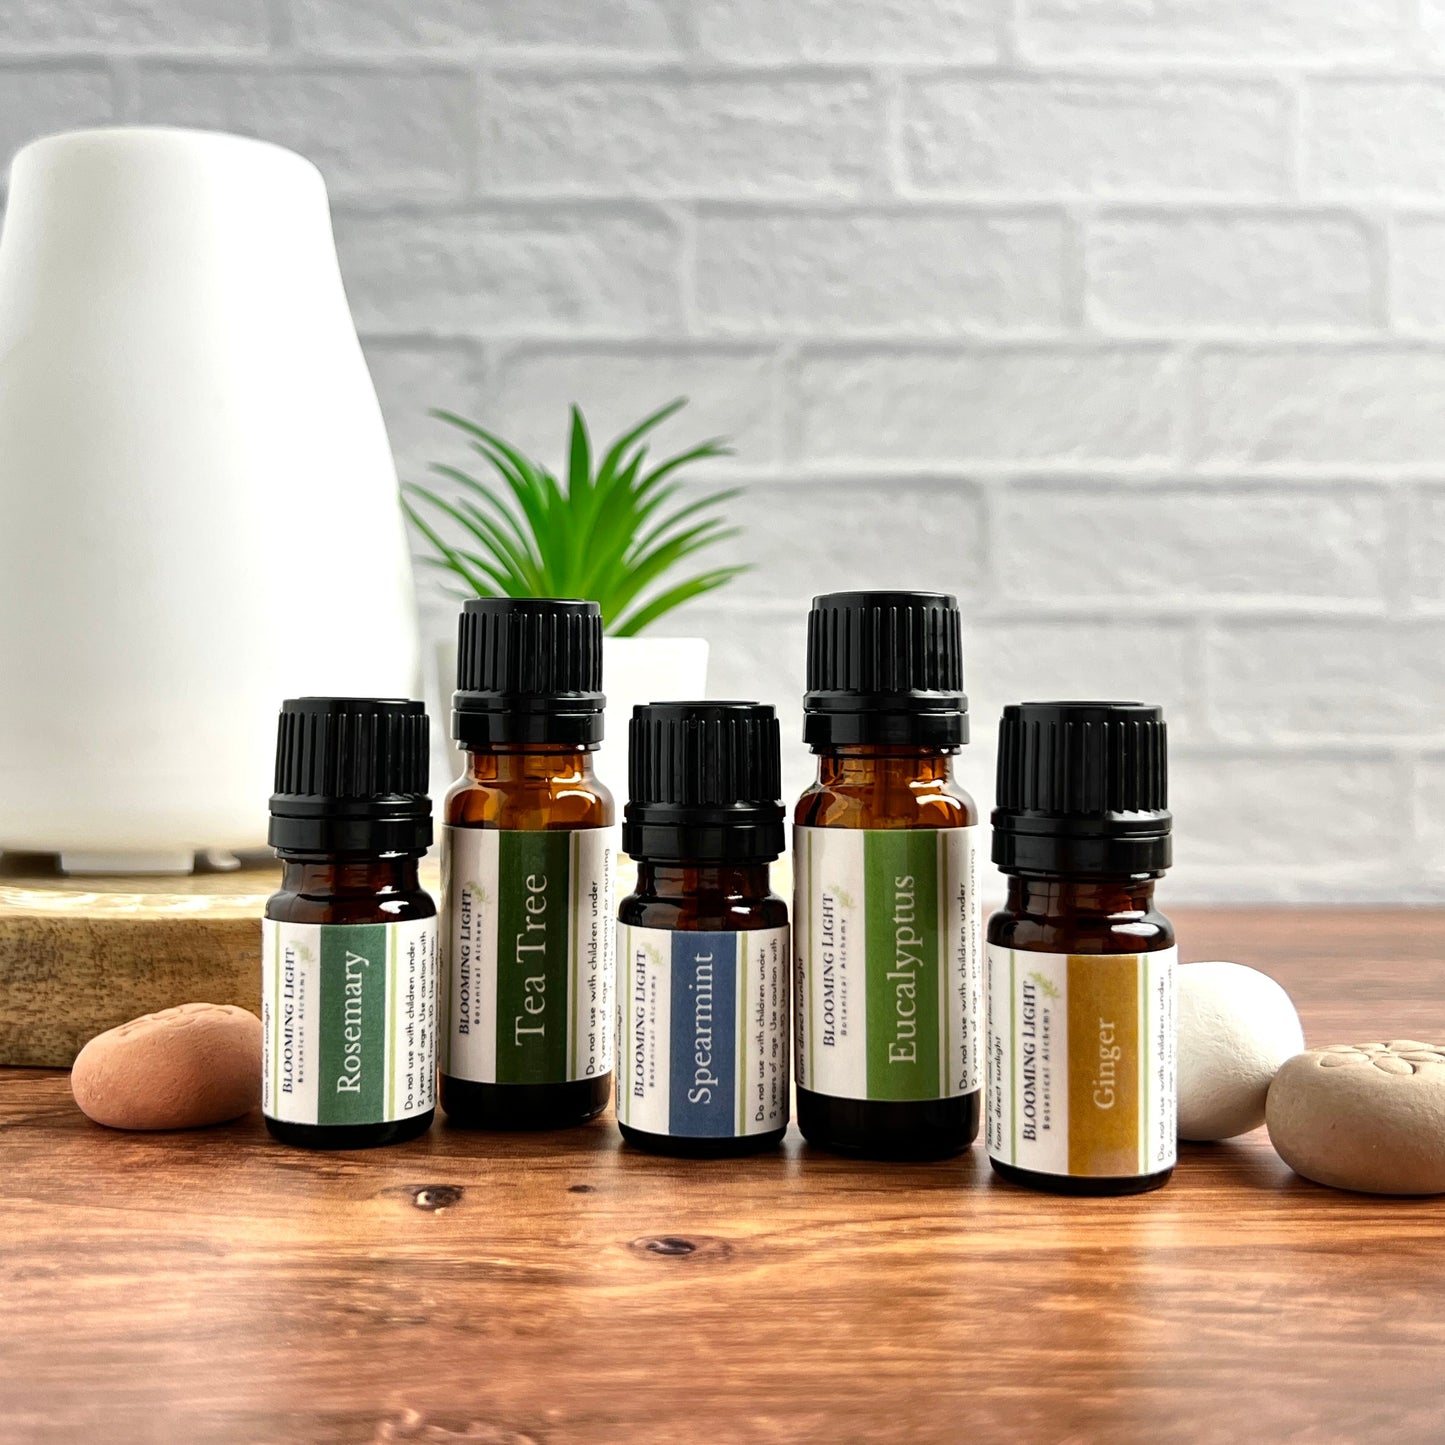 Wood & Resin Essential Oils - sold individually